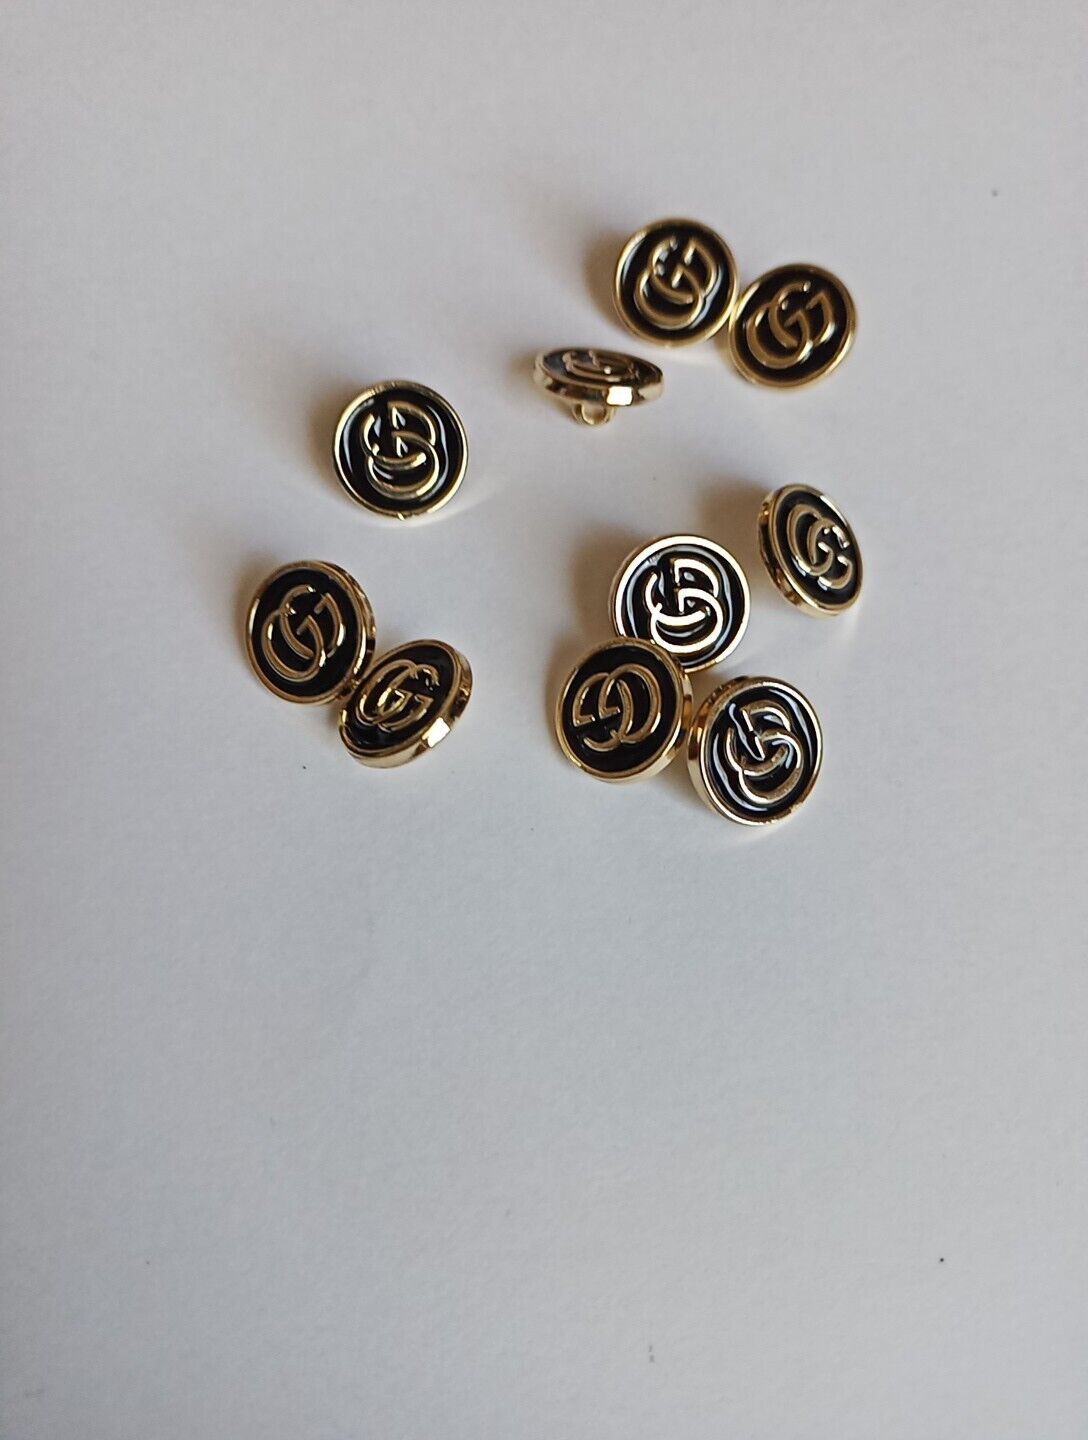 Lot Of 10 Small Gucci buttons 13mm Gold Tone Gg Designer Button Replacement 